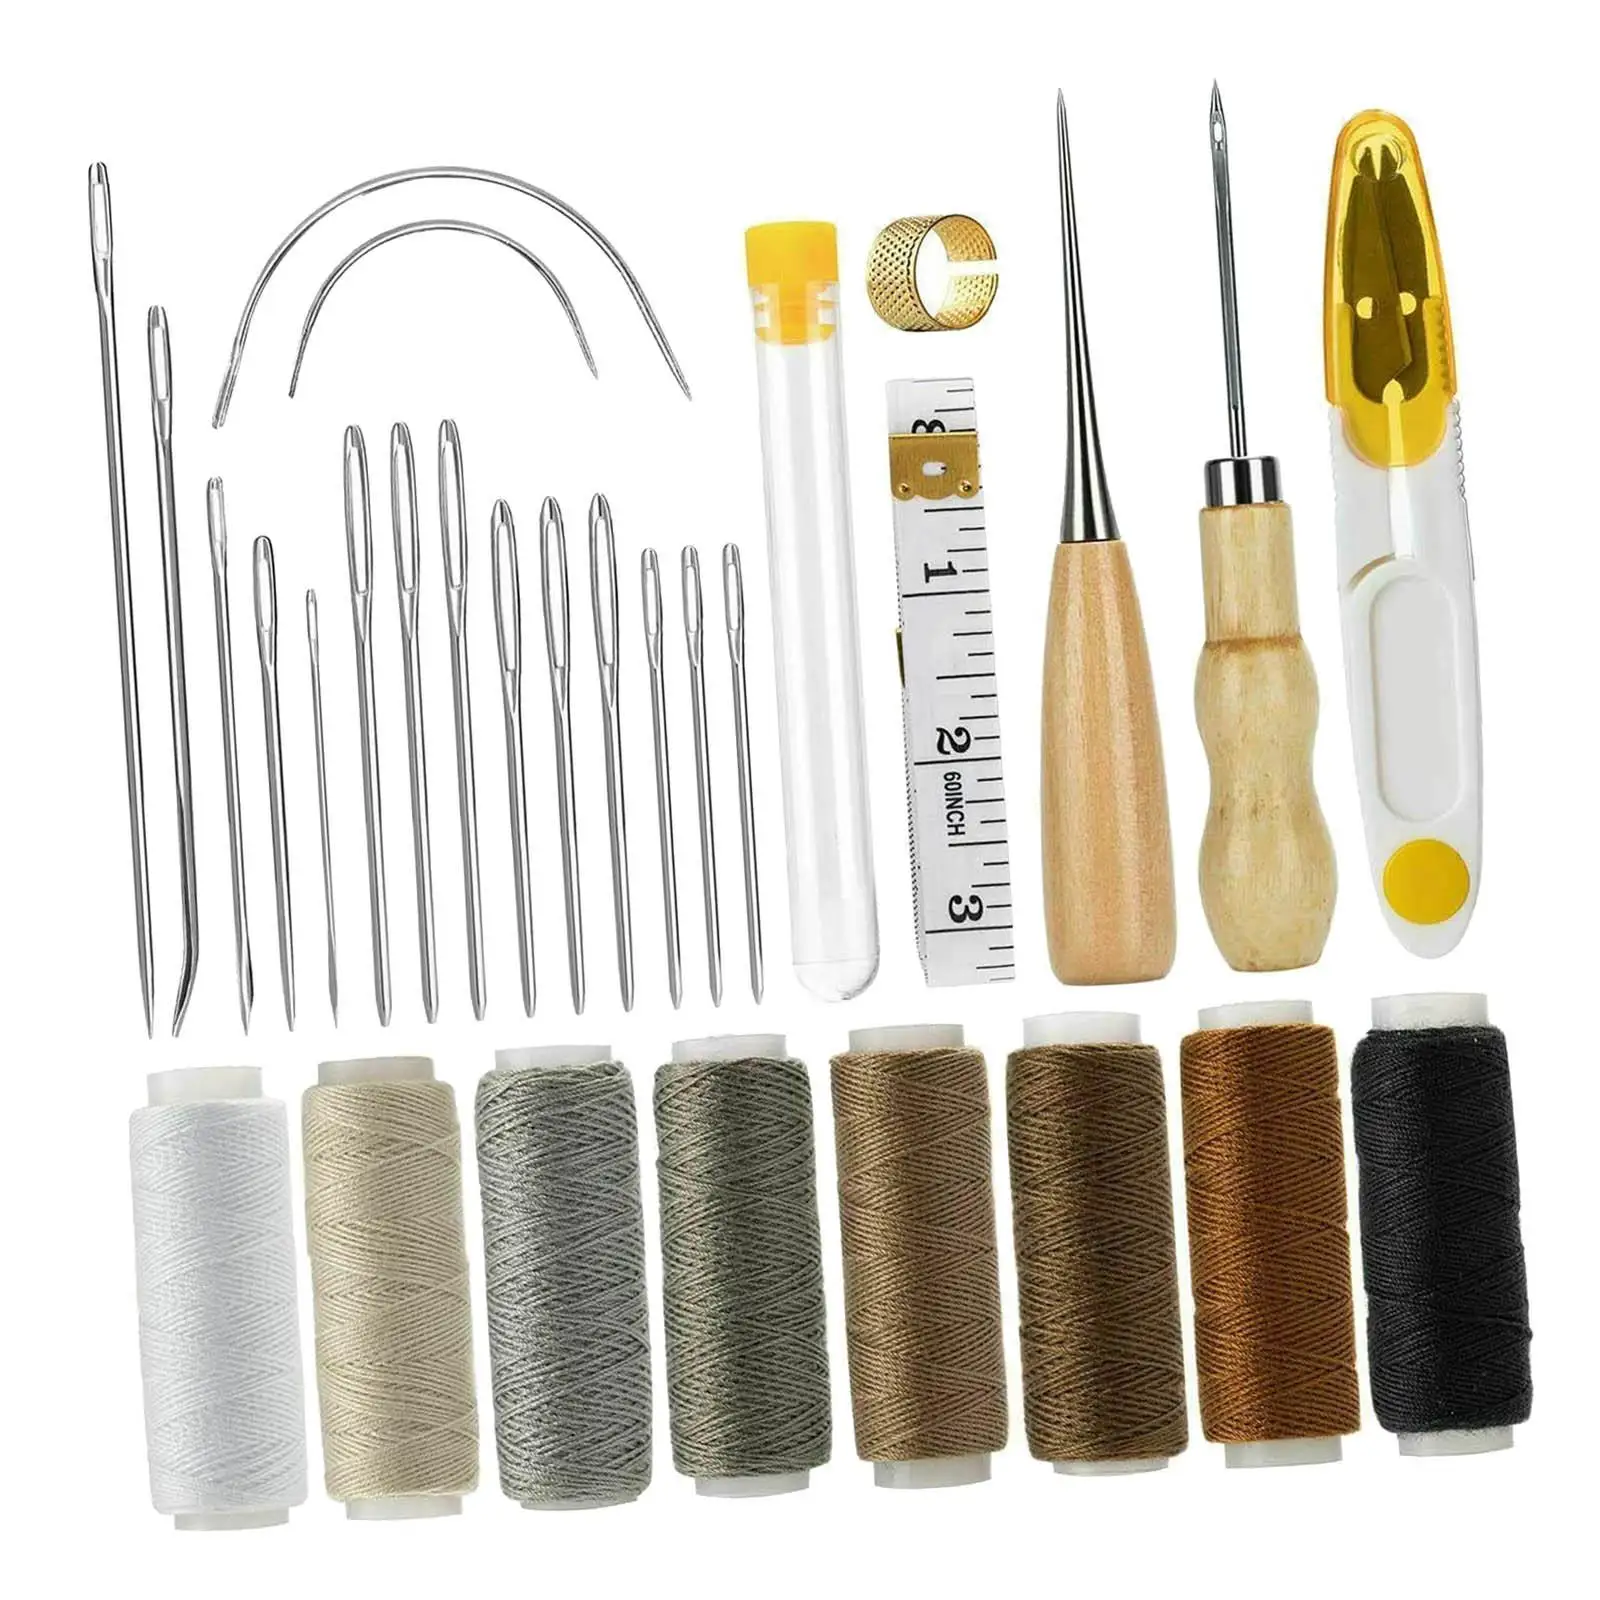 Multifunction 29Pieces Stitching Hand Sewing Leather Upholstery Repair Leather